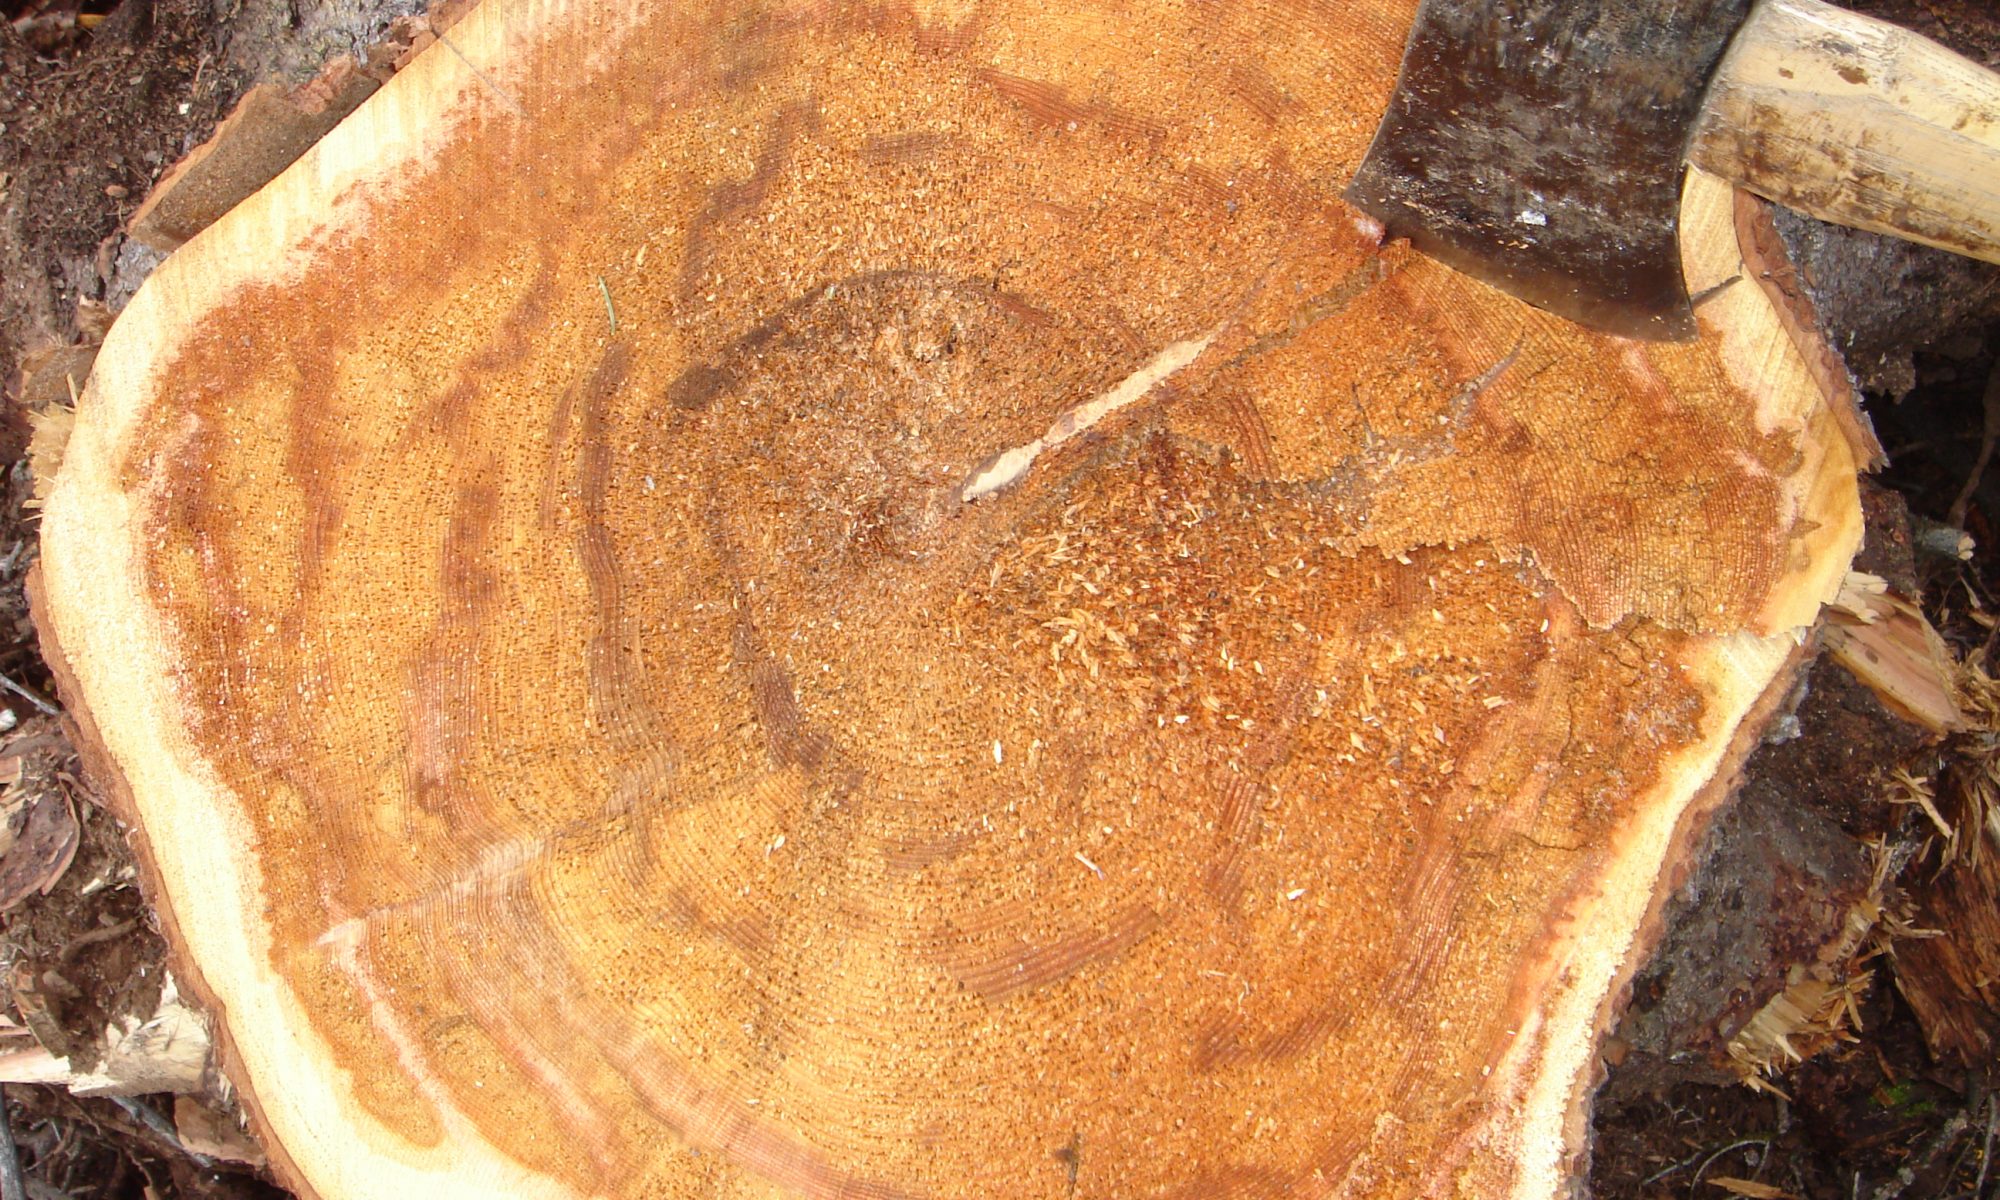 Advanced decay of red root rot, caused by Onnia tomentosa, in a stump of Picea engelmannii (Engelmann spruce).